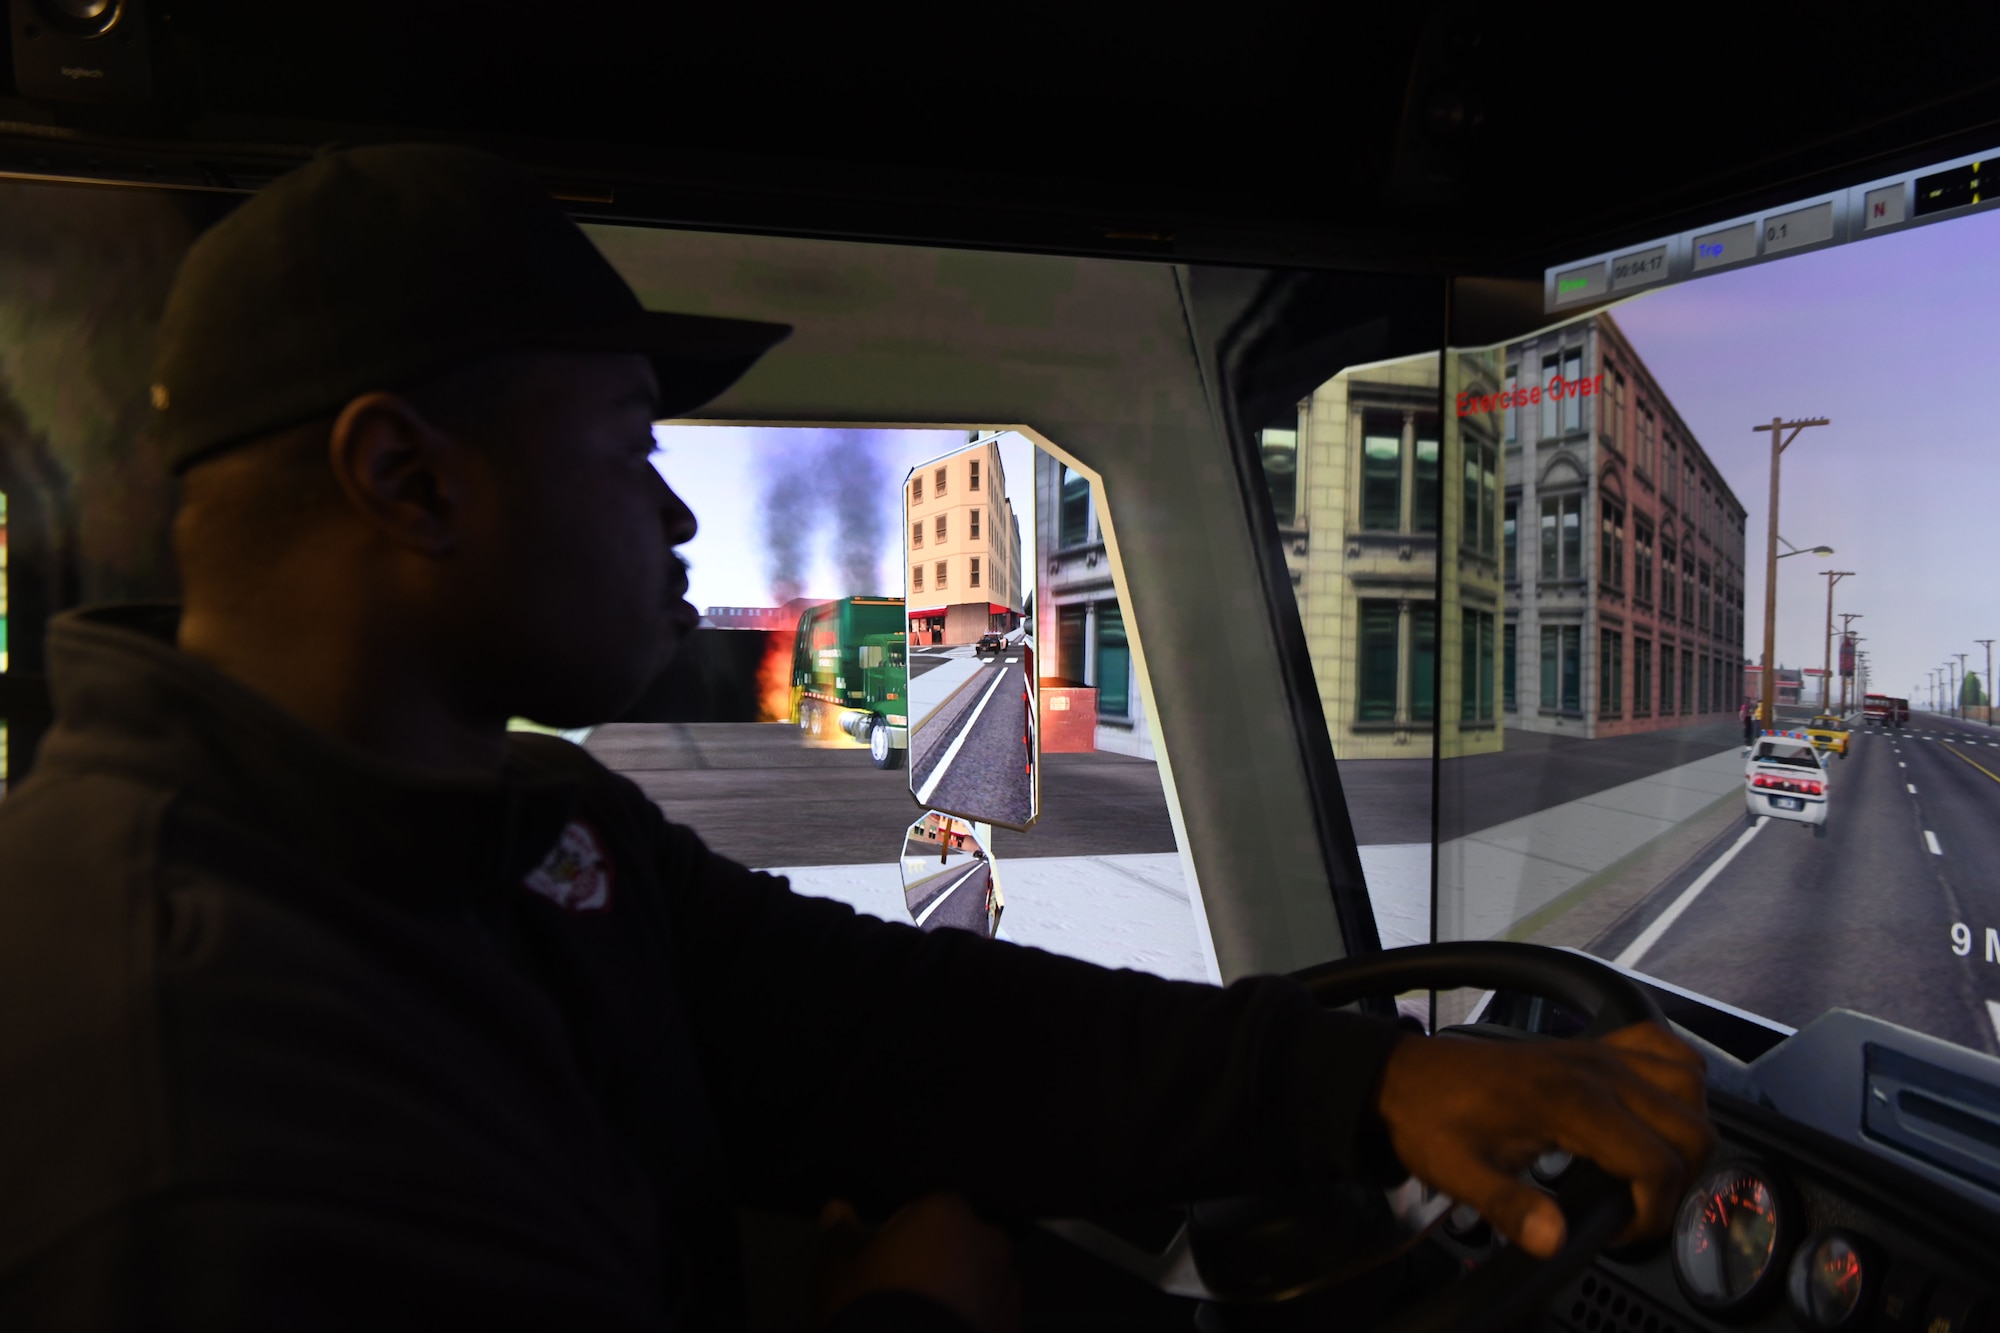 Jonathan Matthews, a firefighter assigned to the 97th AMW Fire Department, drives a firetruck driving simulator Jan. 15, 2019, at Altus Air Force Base, Okla. The simulator comes with scenarios built in, but can also be customized for brand new scenarios, allowing firefighters to hone their skills in a variety of situations. (U.S. Air Force photo by Airman 1st Class Jeremy Wentworth)